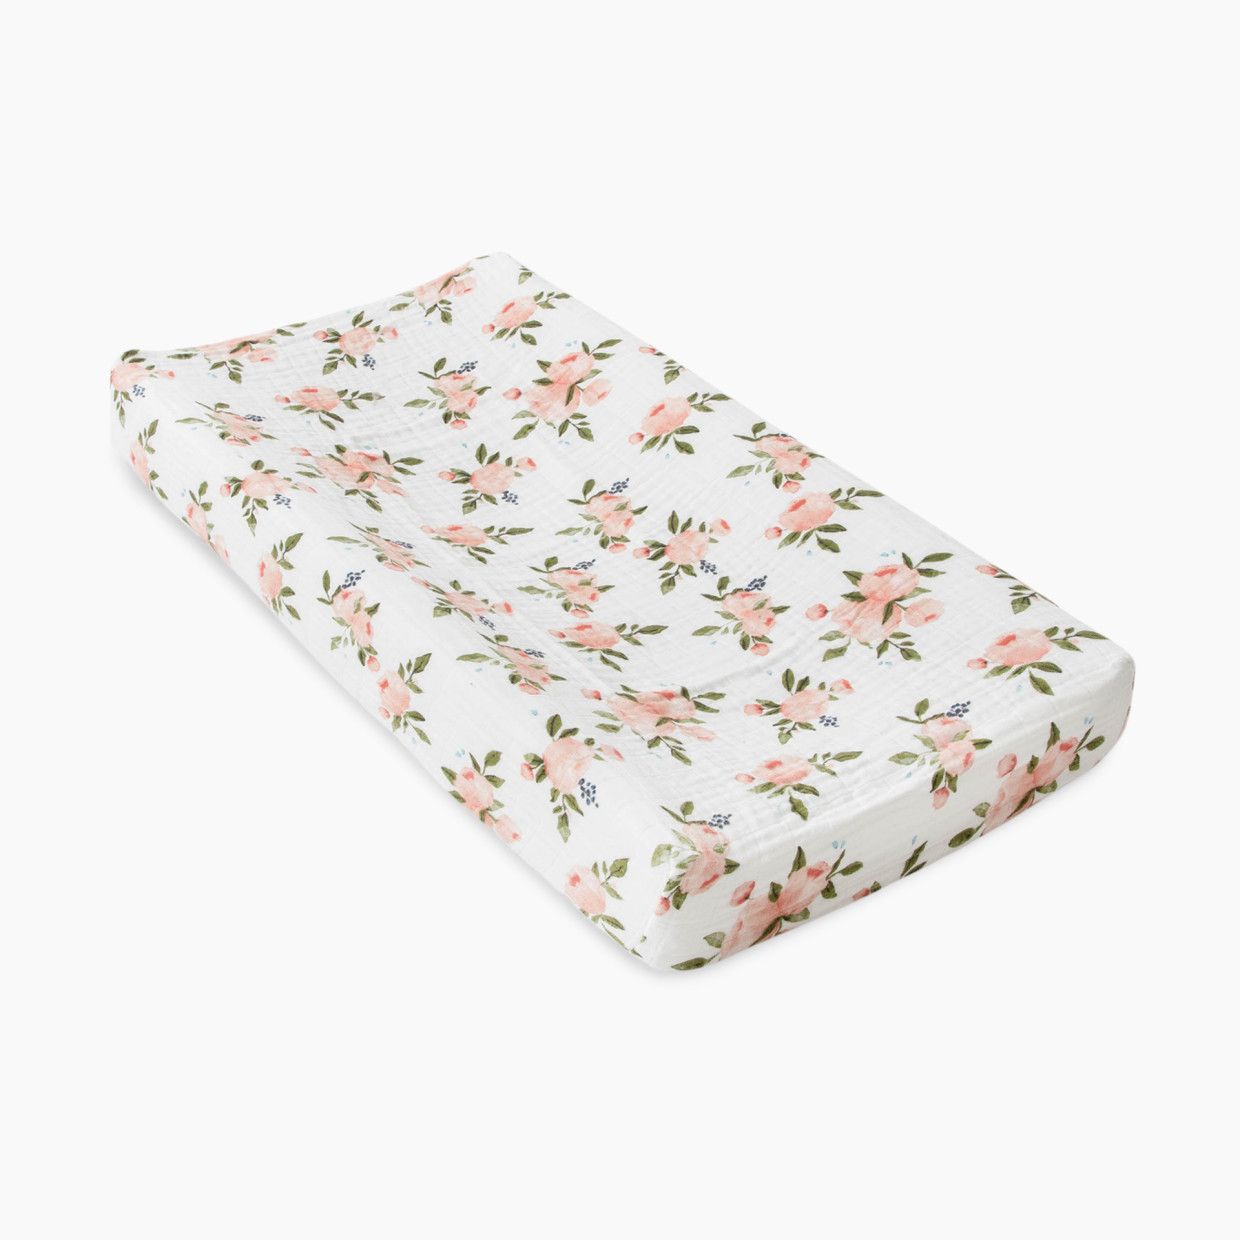 Little Unicorn Cotton Muslin Changing Pad Cover - Watercolor Roses.